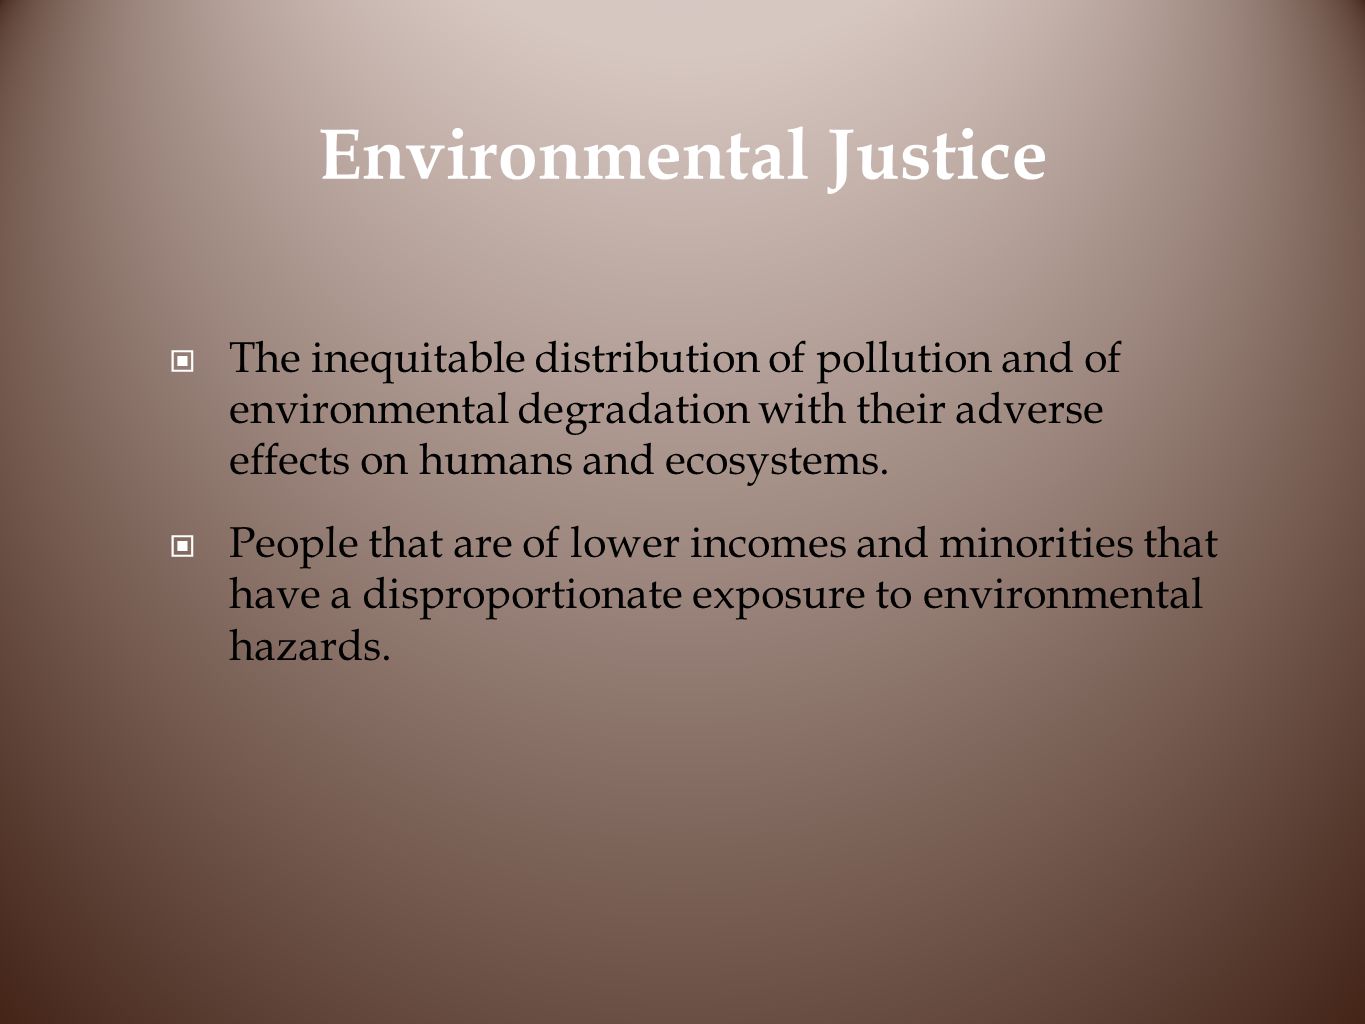 Environmental Justice The inequitable distribution of pollution and of environmental degradation with their adverse effects on humans and ecosystems.